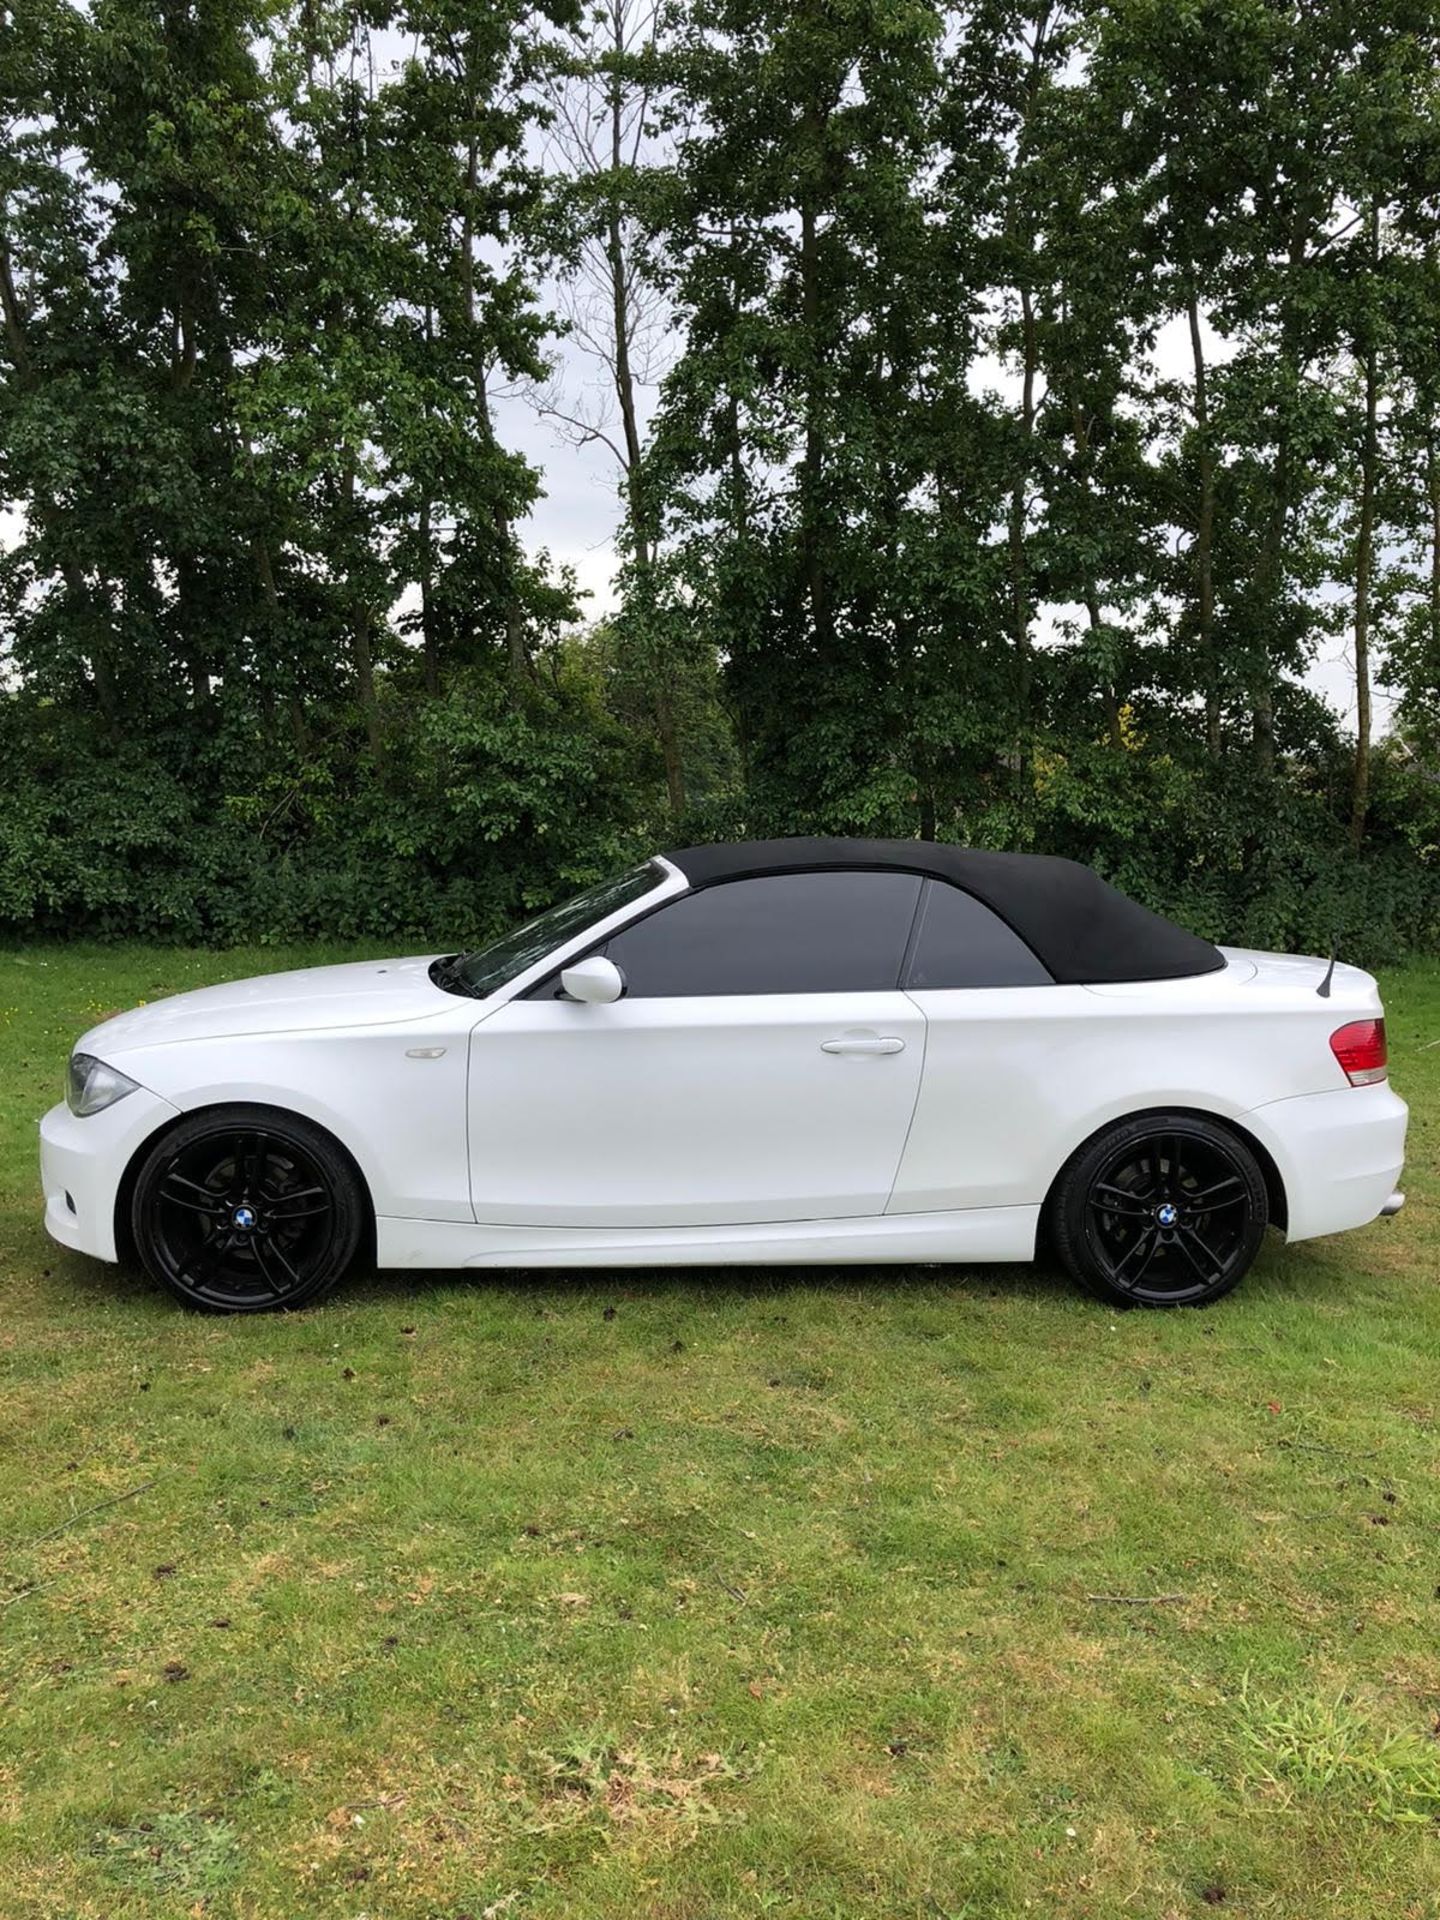 2009/09 REG BMW 118D M SPORT 2.0 DIESEL WHITE CONVERTIBLE, SHOWING 5 FORMER KEEPERS *NO VAT* - Image 5 of 15